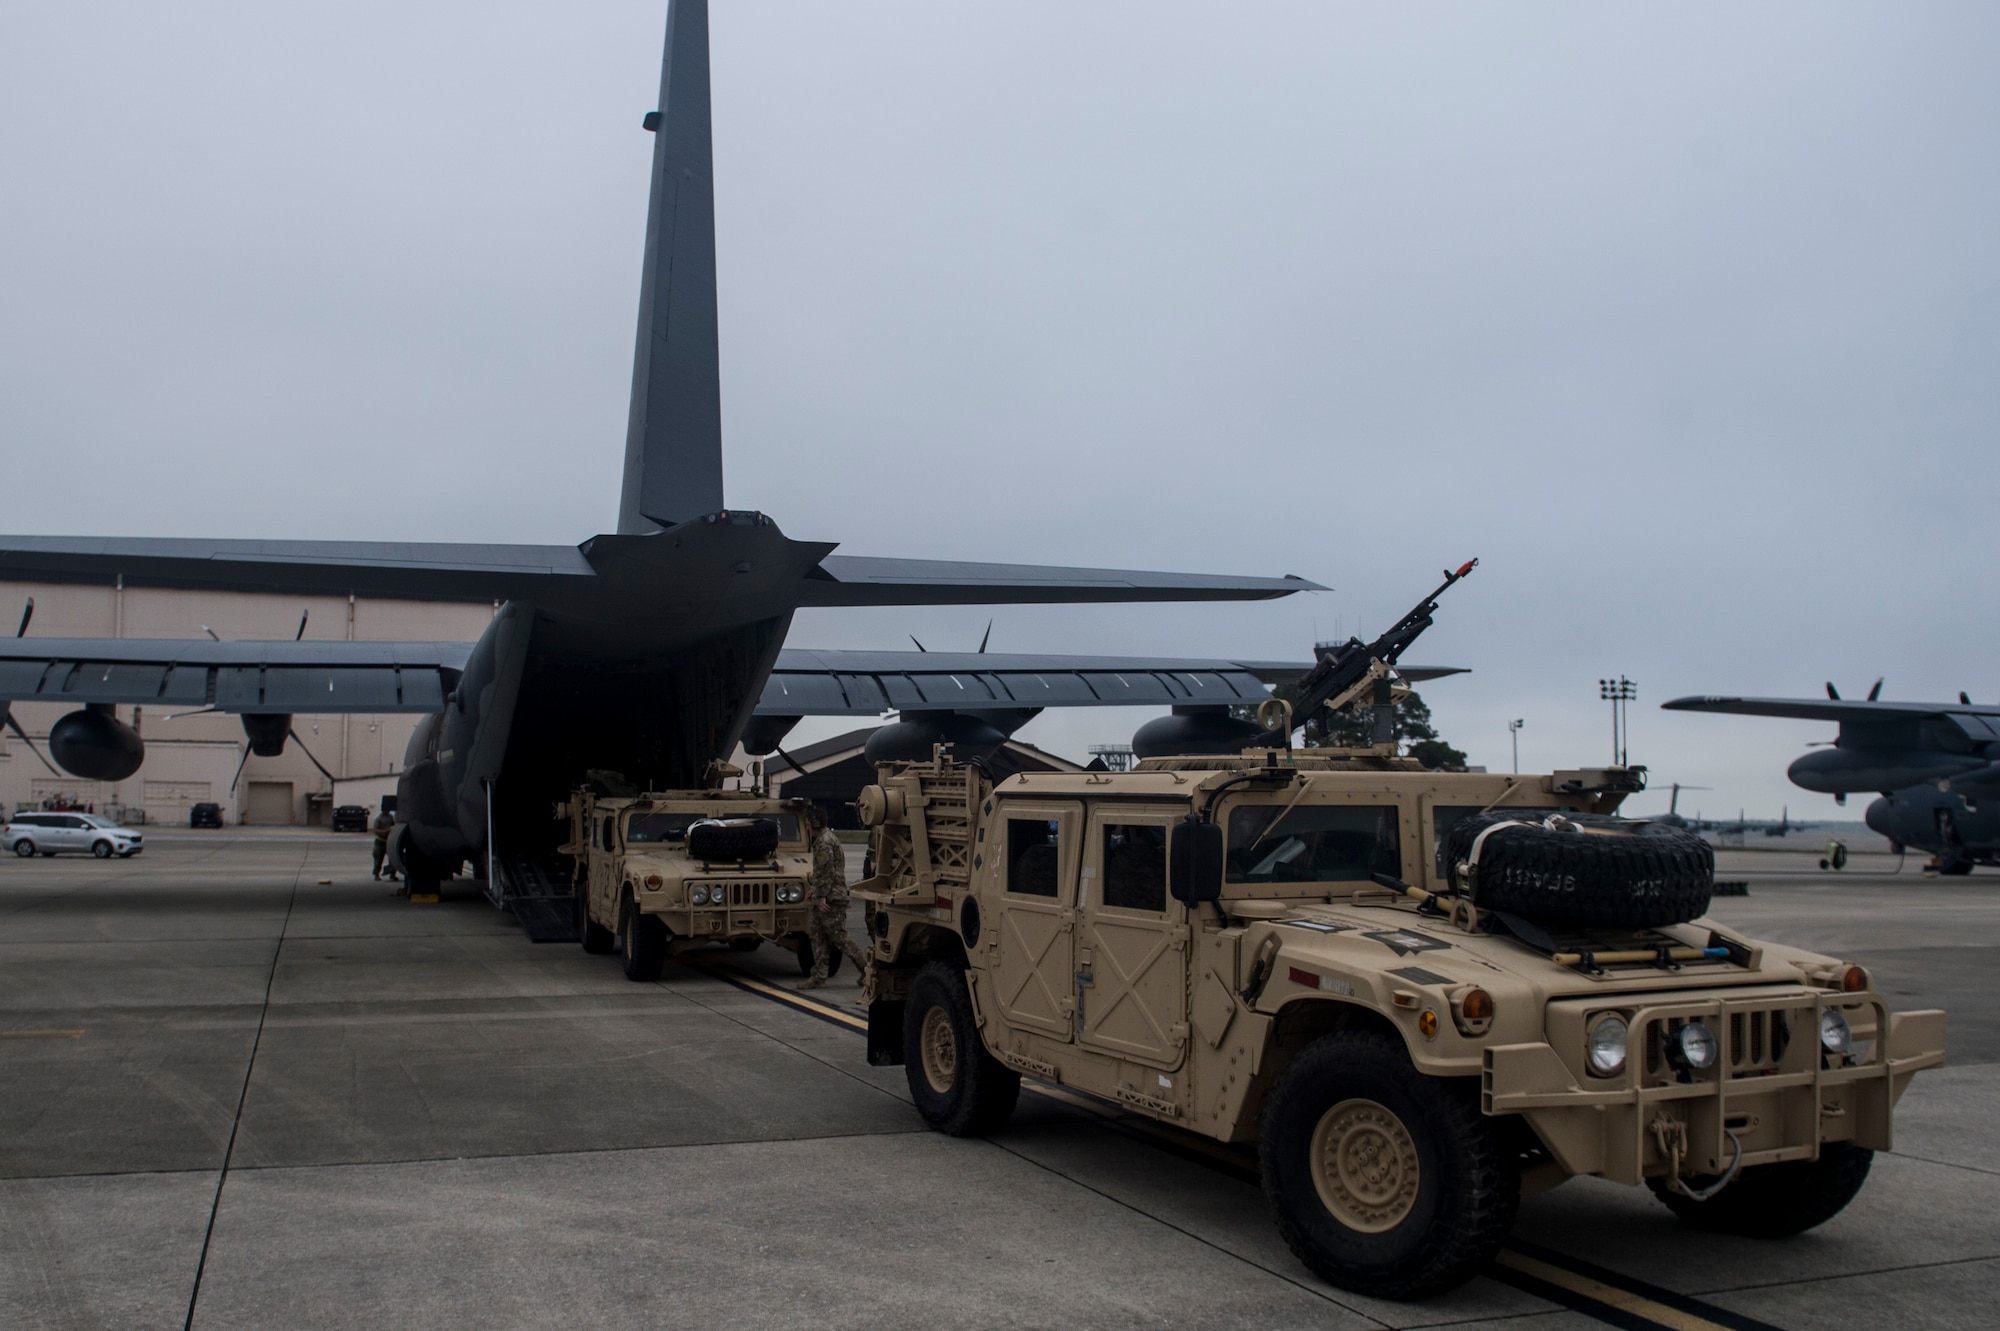 Two Humvees are loaded into a U.S.  Air Force MC-130J Commmando II during Exercise Emerald Warrior 17 at Hurlburt Field, Fla., Feb. 28, 2017. Emerald Warrior is a U.S. Special Operations Command exercise during which joint special operations forces train to respond to various threats across the spectrum of conflict. (U.S. Air Force photo by Staff Sgt. Corey Hook)